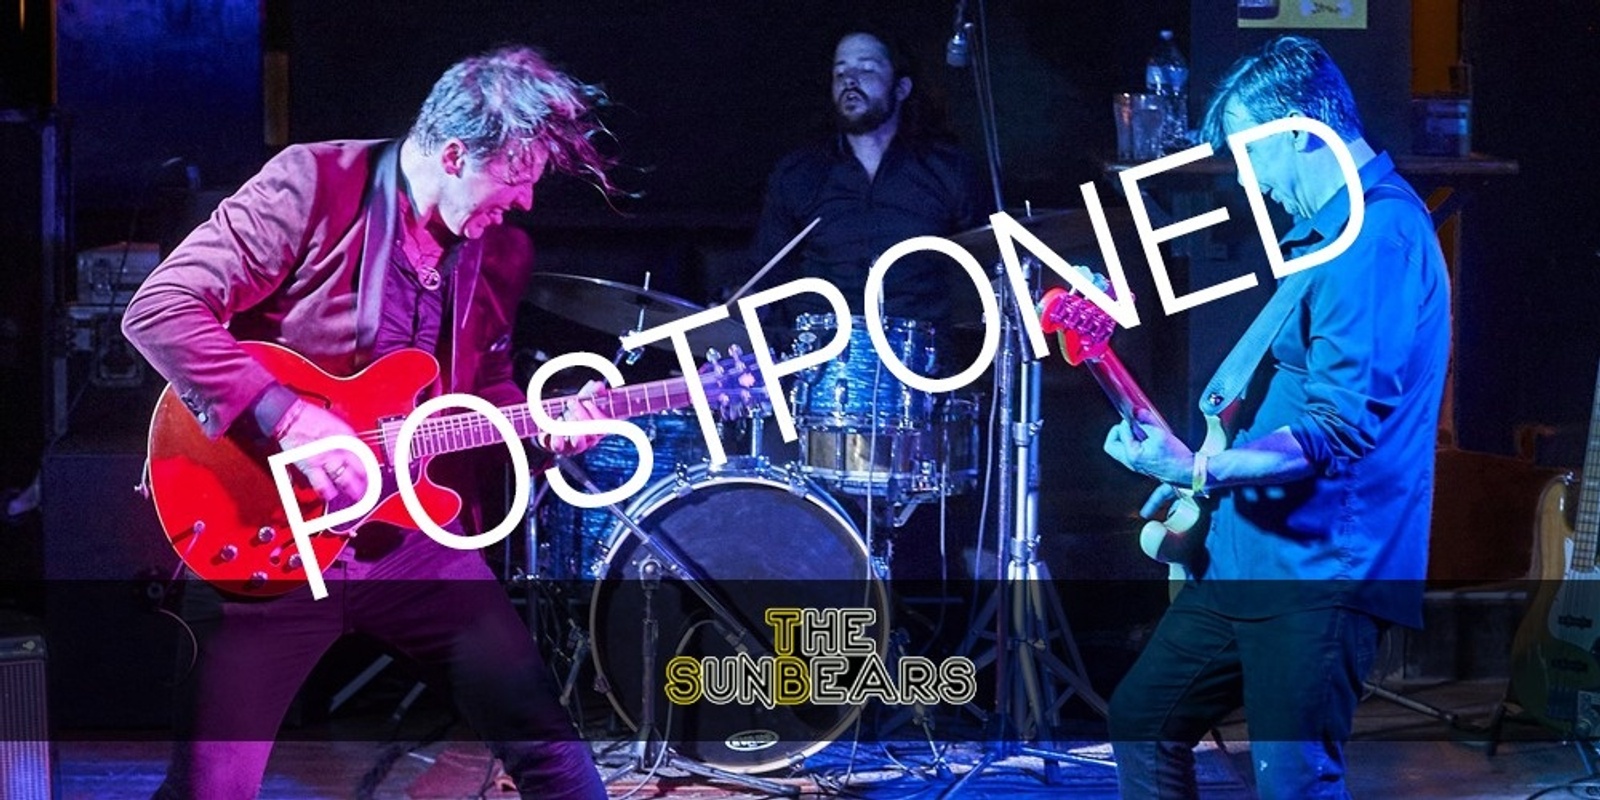 Banner image for Regretfully Postponed - THE SUNBEARS supported by TONY JAGGERS presented by the Narooma School of ARTS